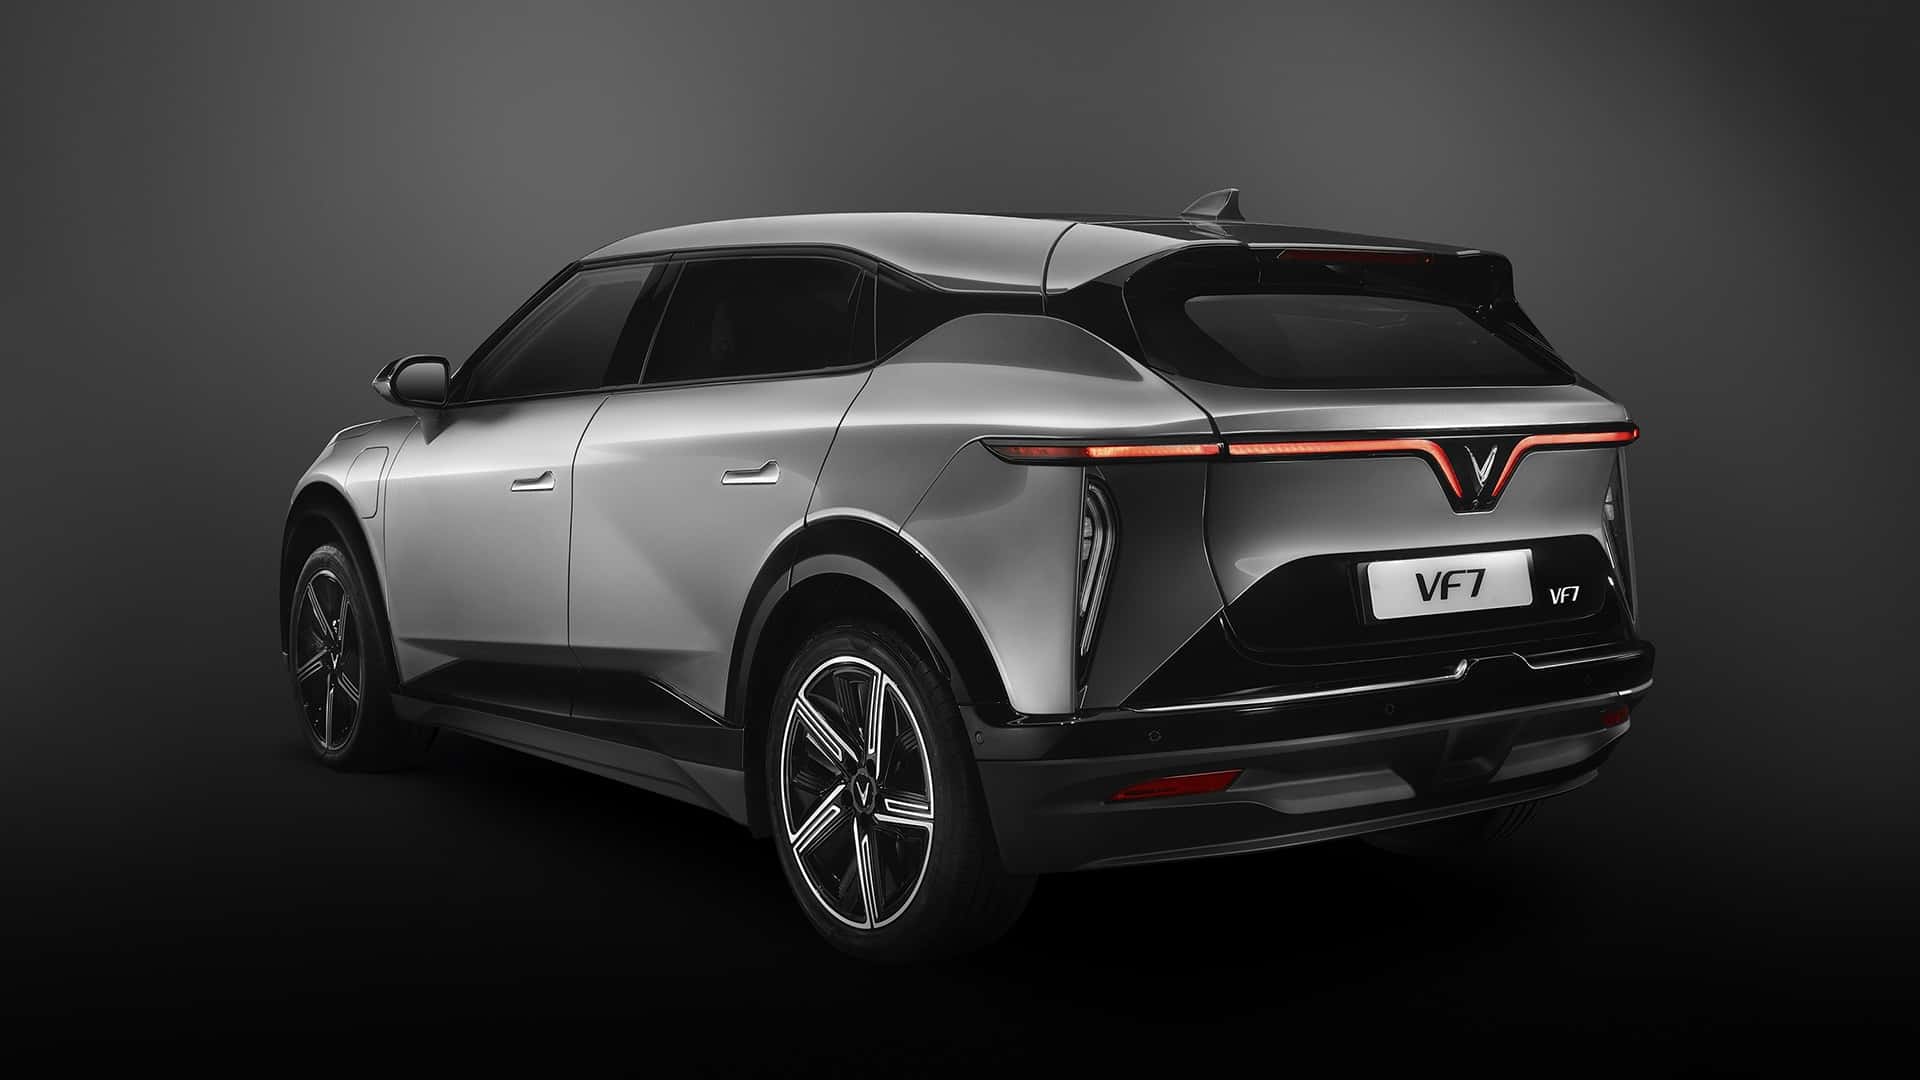 vinfast vf7 compact crossover starts at $35,000 in vietnam